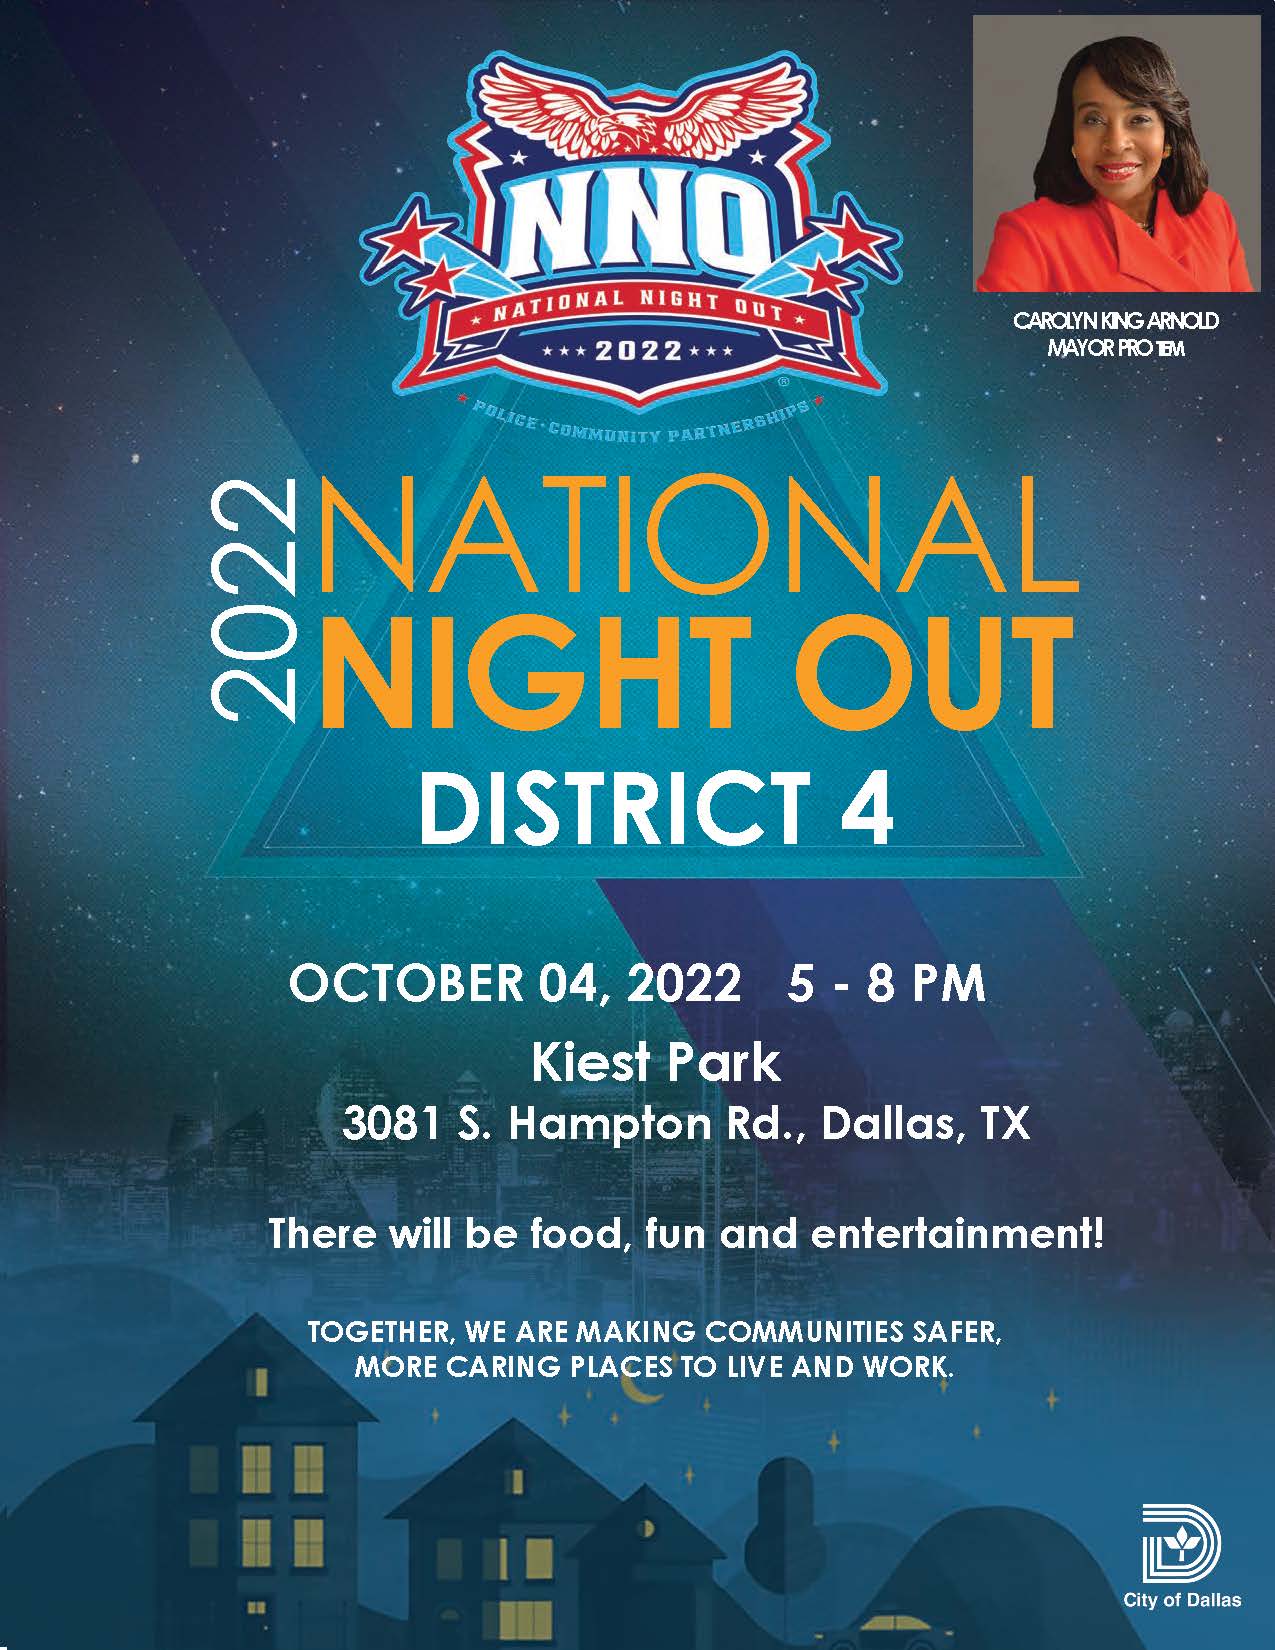 D4's National Night Out Flyer.jpg